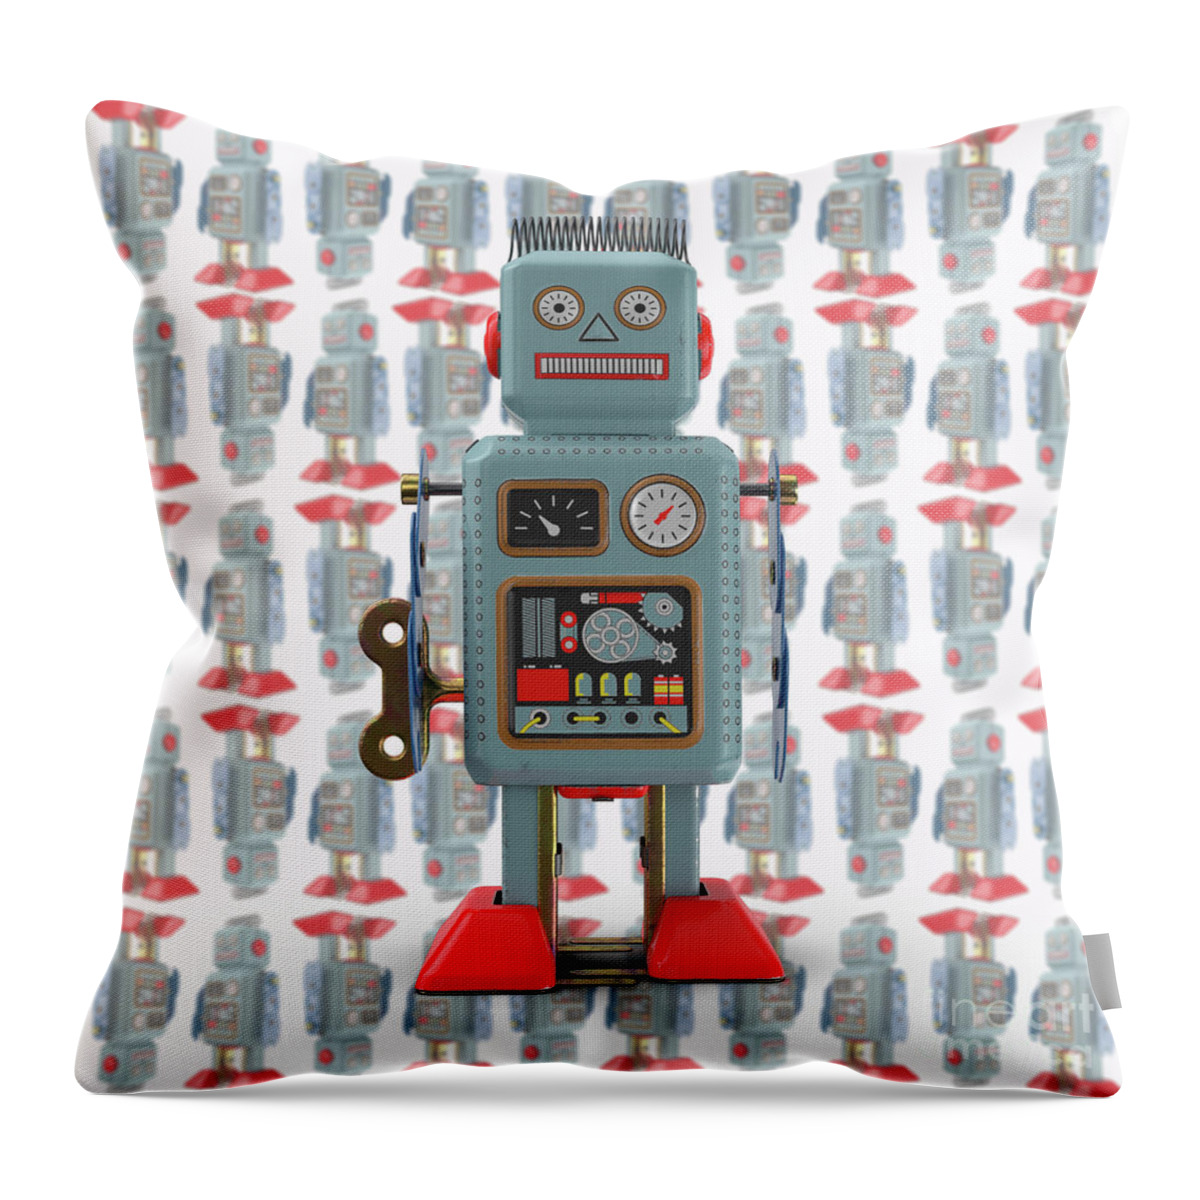 Robot Throw Pillow featuring the photograph Vintage Japanese Toy Robot Design by Edward Fielding